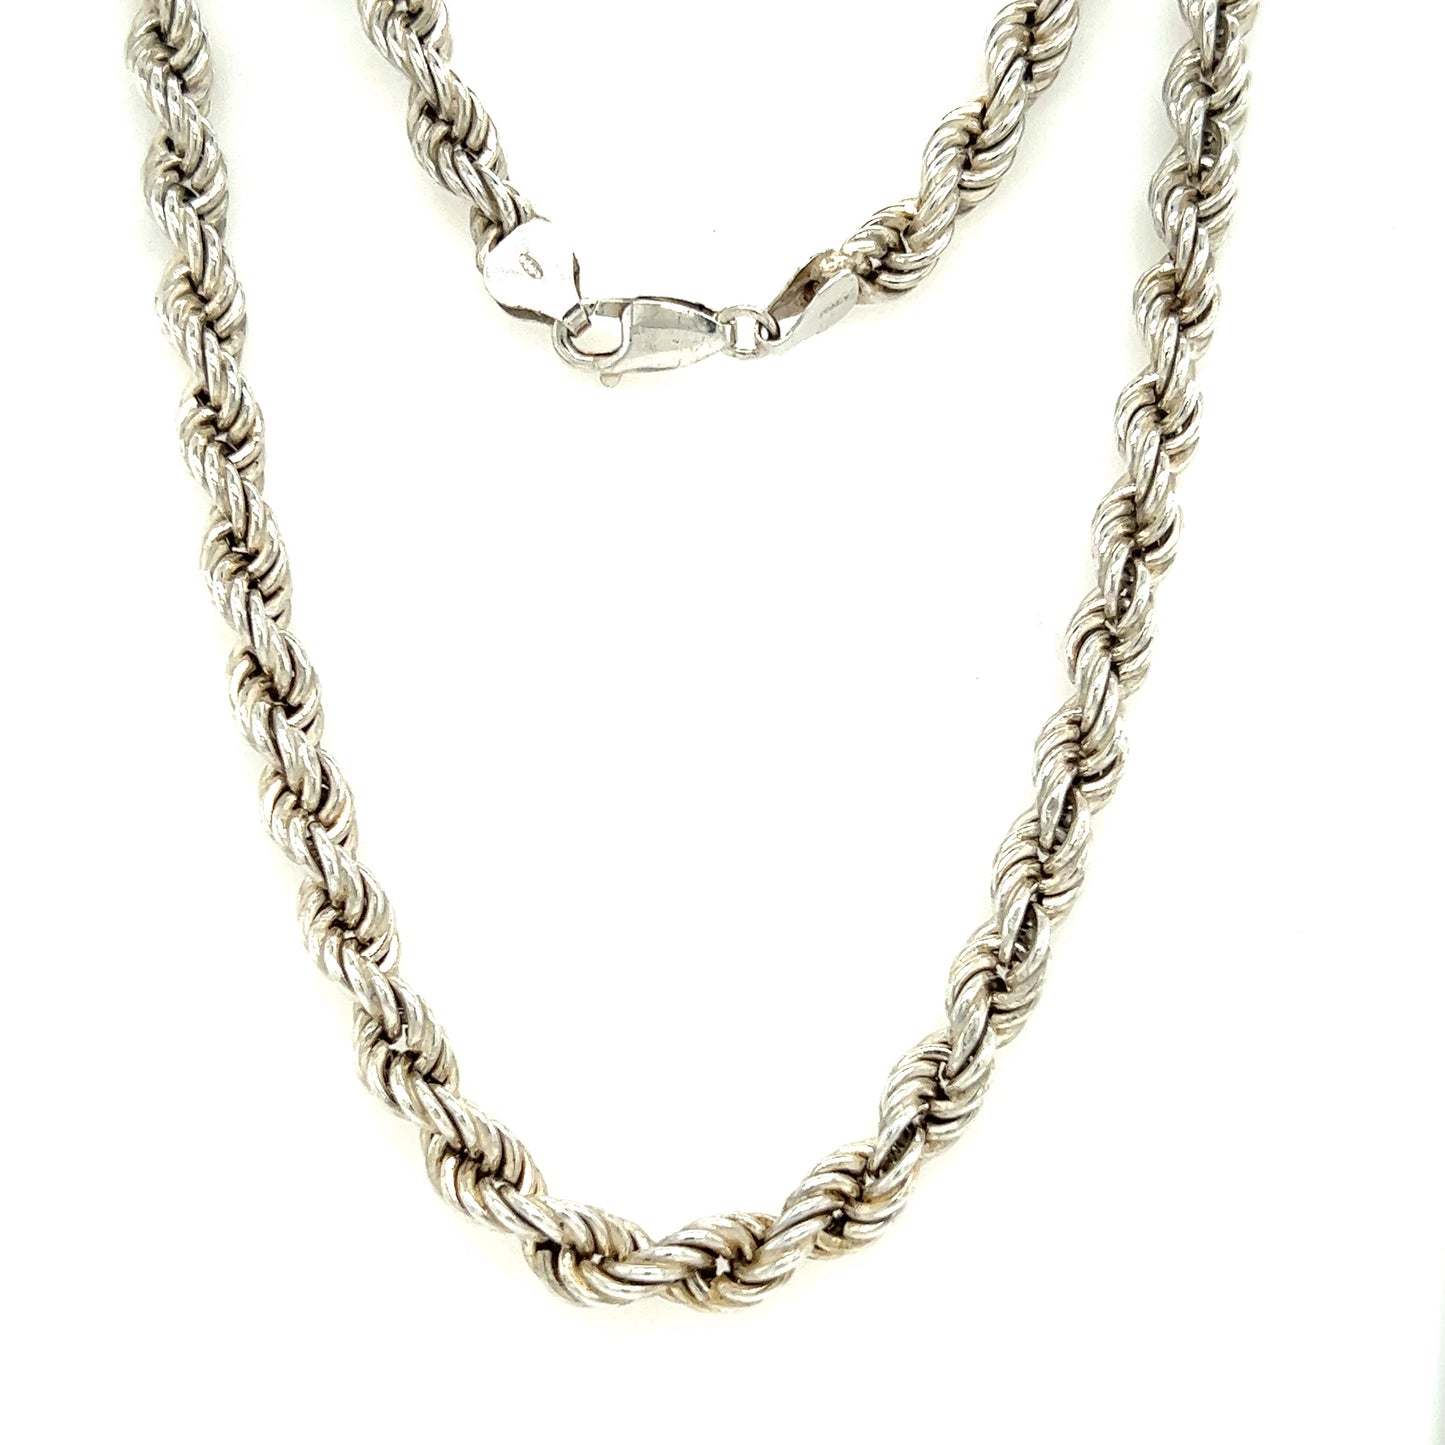 Rope Chain 6mm with 20in Length in Sterling Silver Full Chain View